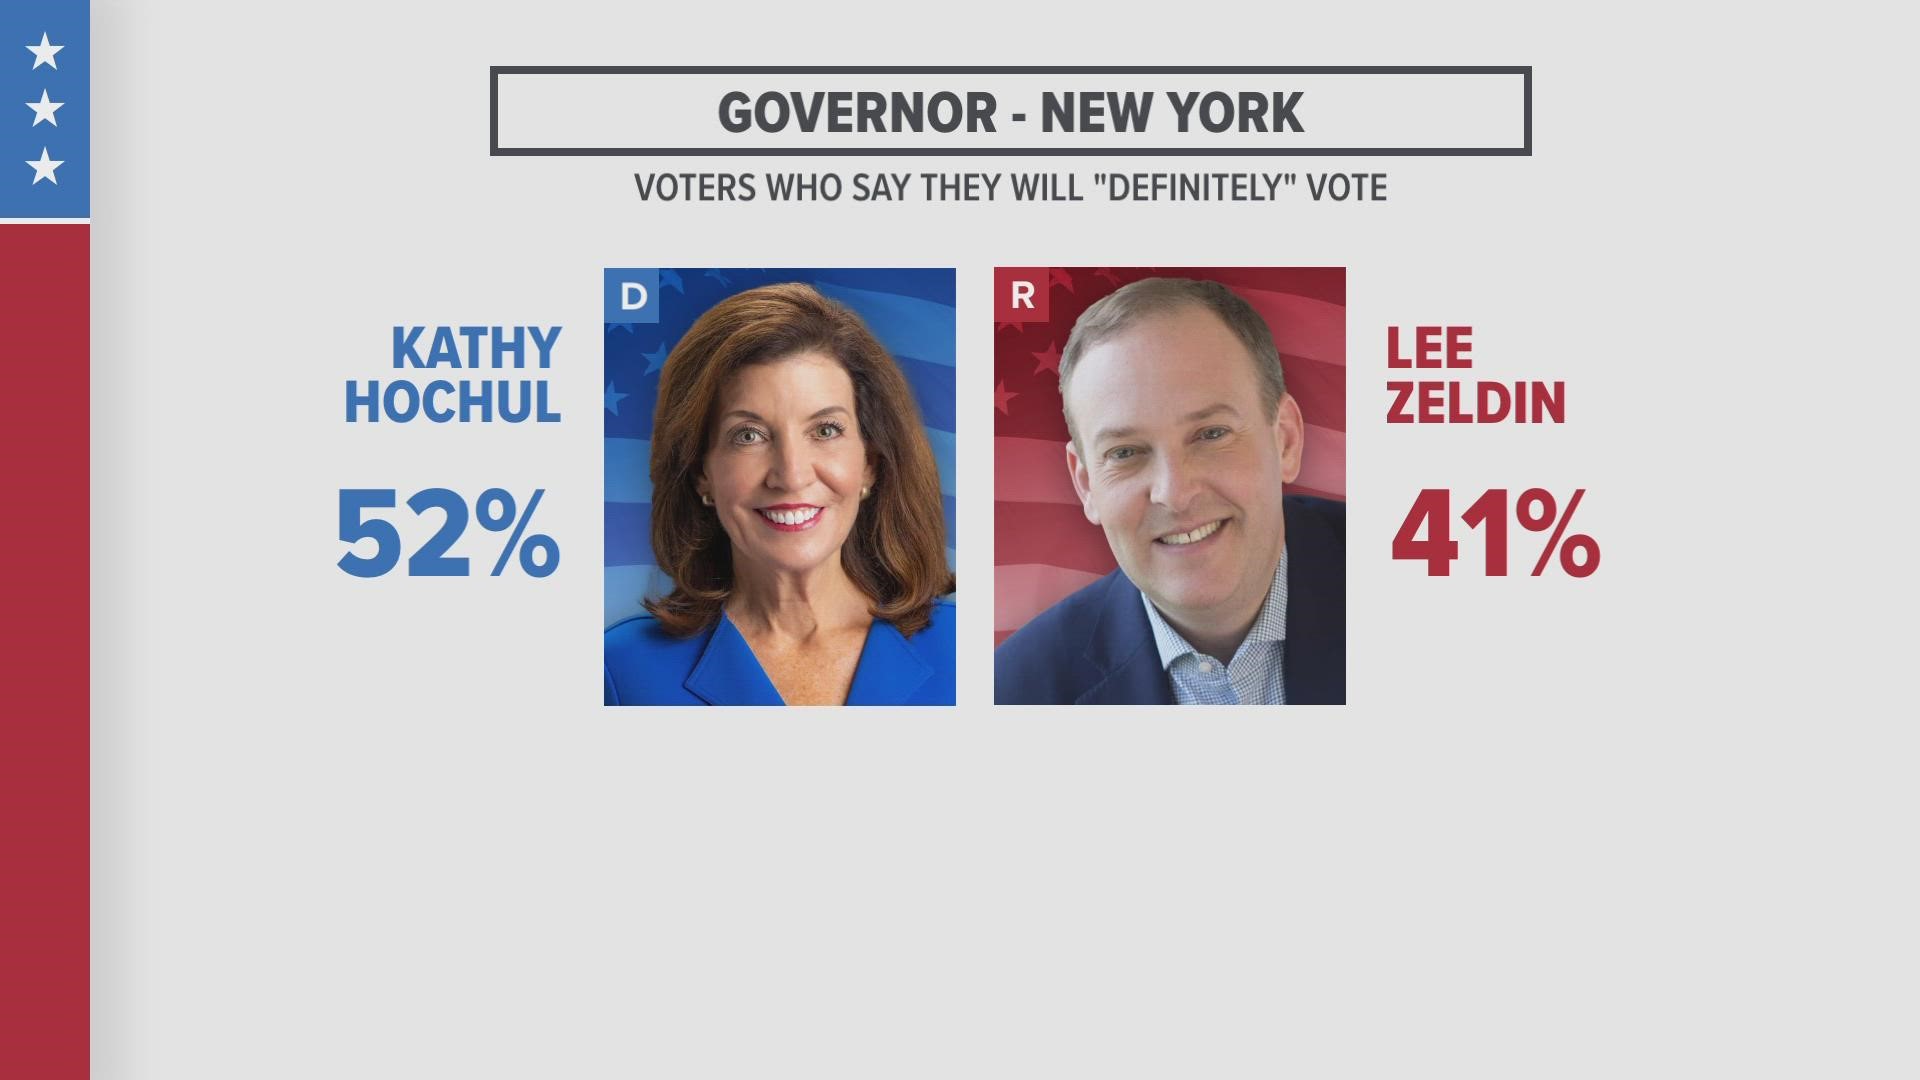 The Siena poll gives Gov. Kathy Hochul a 52% to 41% lead over Lee Zeldin in the gubernatorial race.